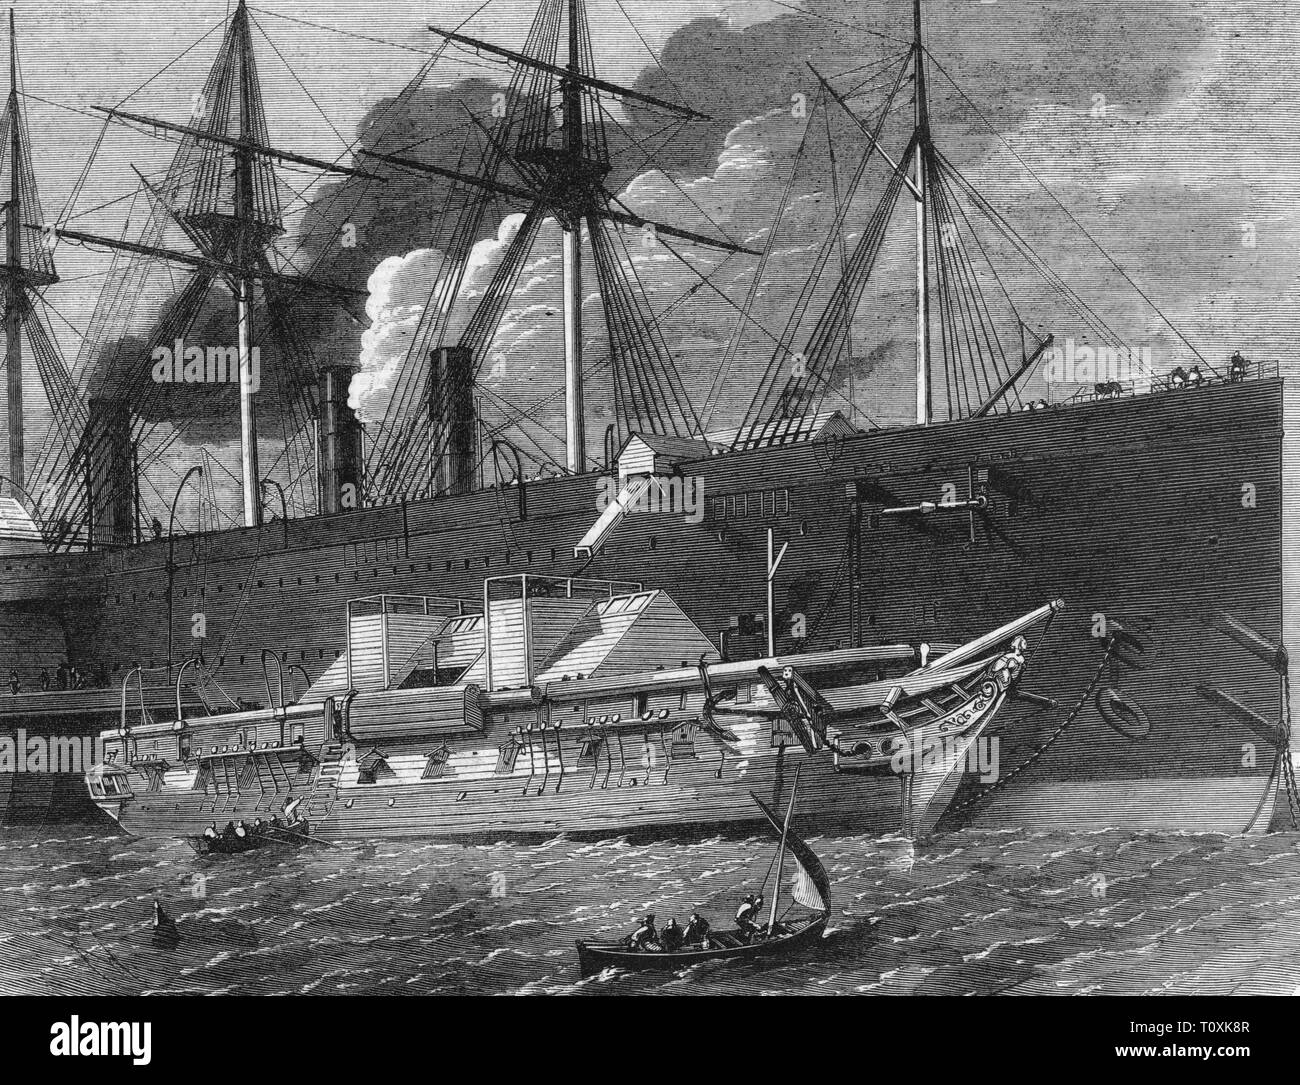 mail, telegraphy, Atlantic cable, laying 1865 - 1866, loading of the cable on the ship 'Great Eastern', wood engraving, 'The London Illustrated News', 1865, cable-laying ship, auxiliary ship, transatlantic communications cable, undersea cable, undersea cables, telegraph cable, laying, lay, lays, laid, lay cable, lay tiles, oversea connection, people, navigation, Atlantic Ocean, Atlantic, sea, seas, waves, wave, 19th century, mail, post, moving, transfer, transferral, shifting, loading, load, cable, cables, ship, ships, historic, historical, Additional-Rights-Clearance-Info-Not-Available Stock Photo